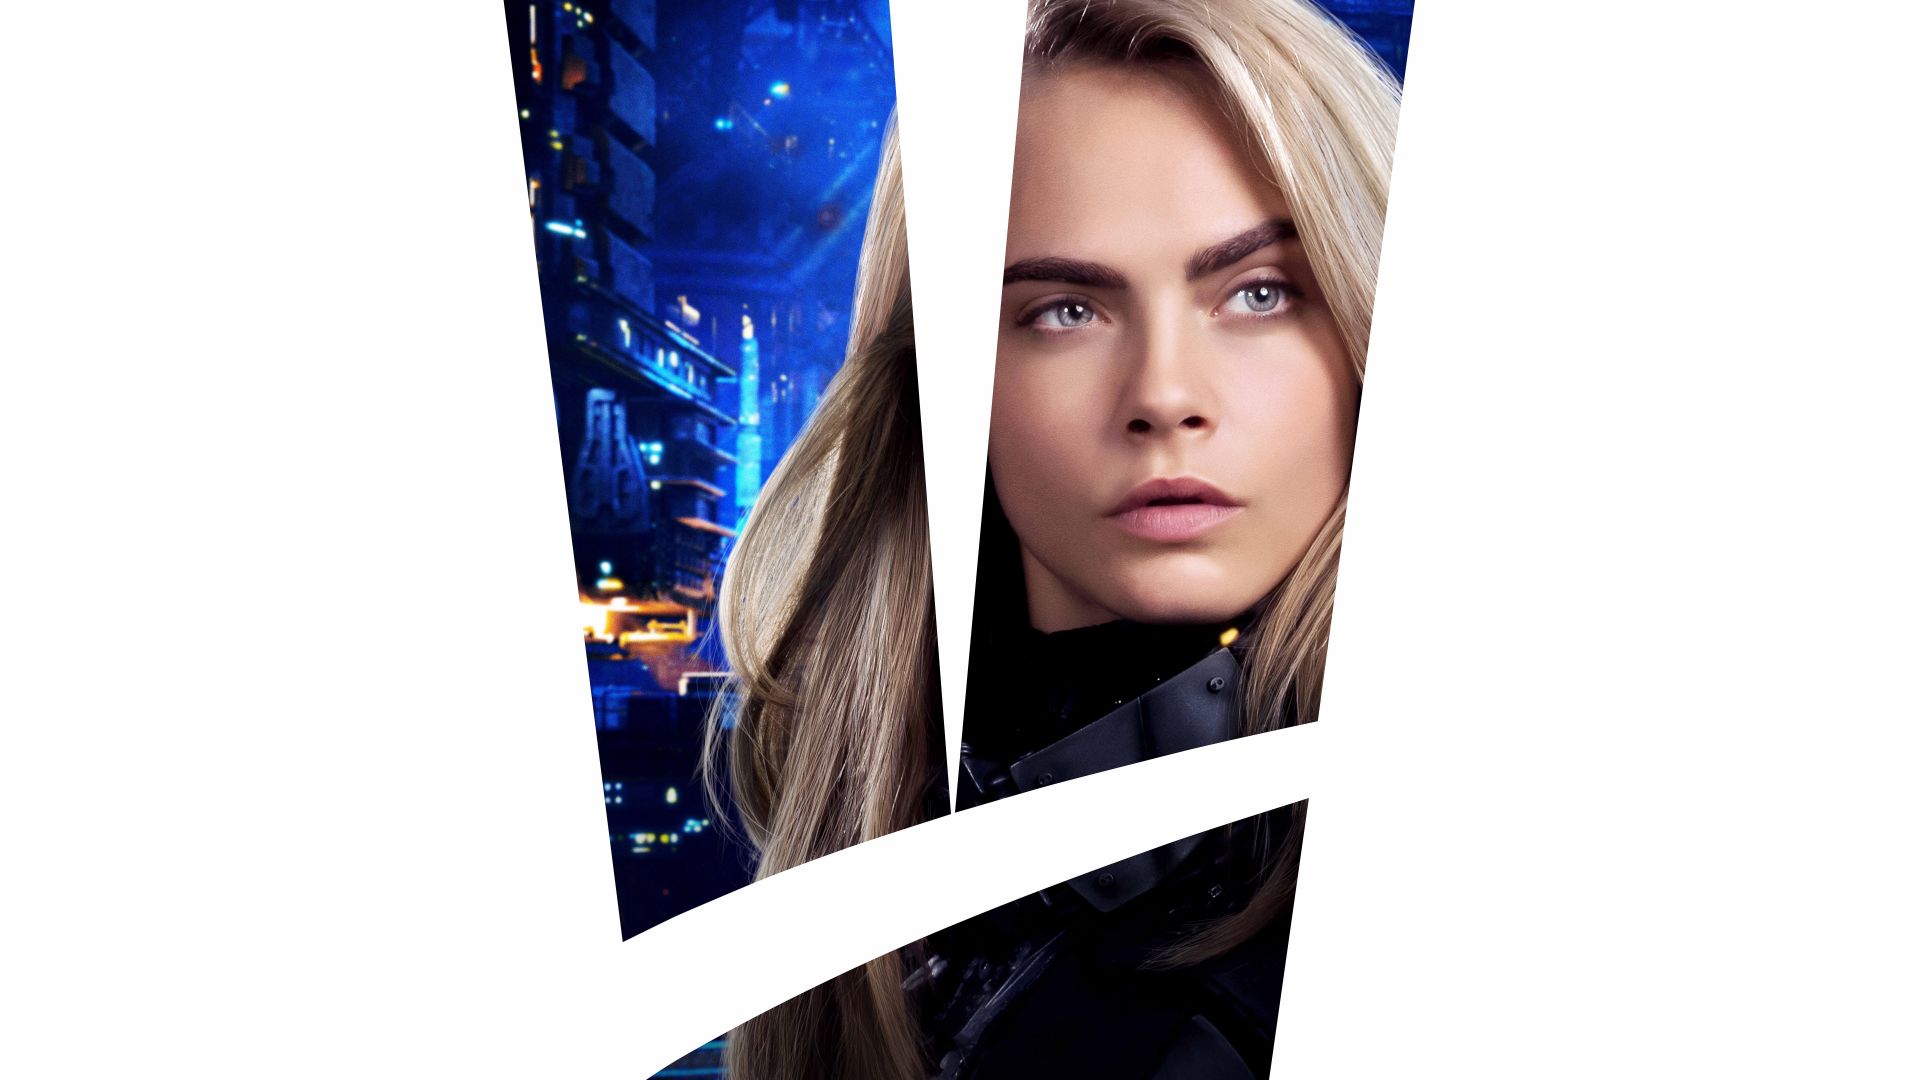 Wallpaper Cara Delevingne as Laureline in Valerian and the city of a thousand planets, movie, actress